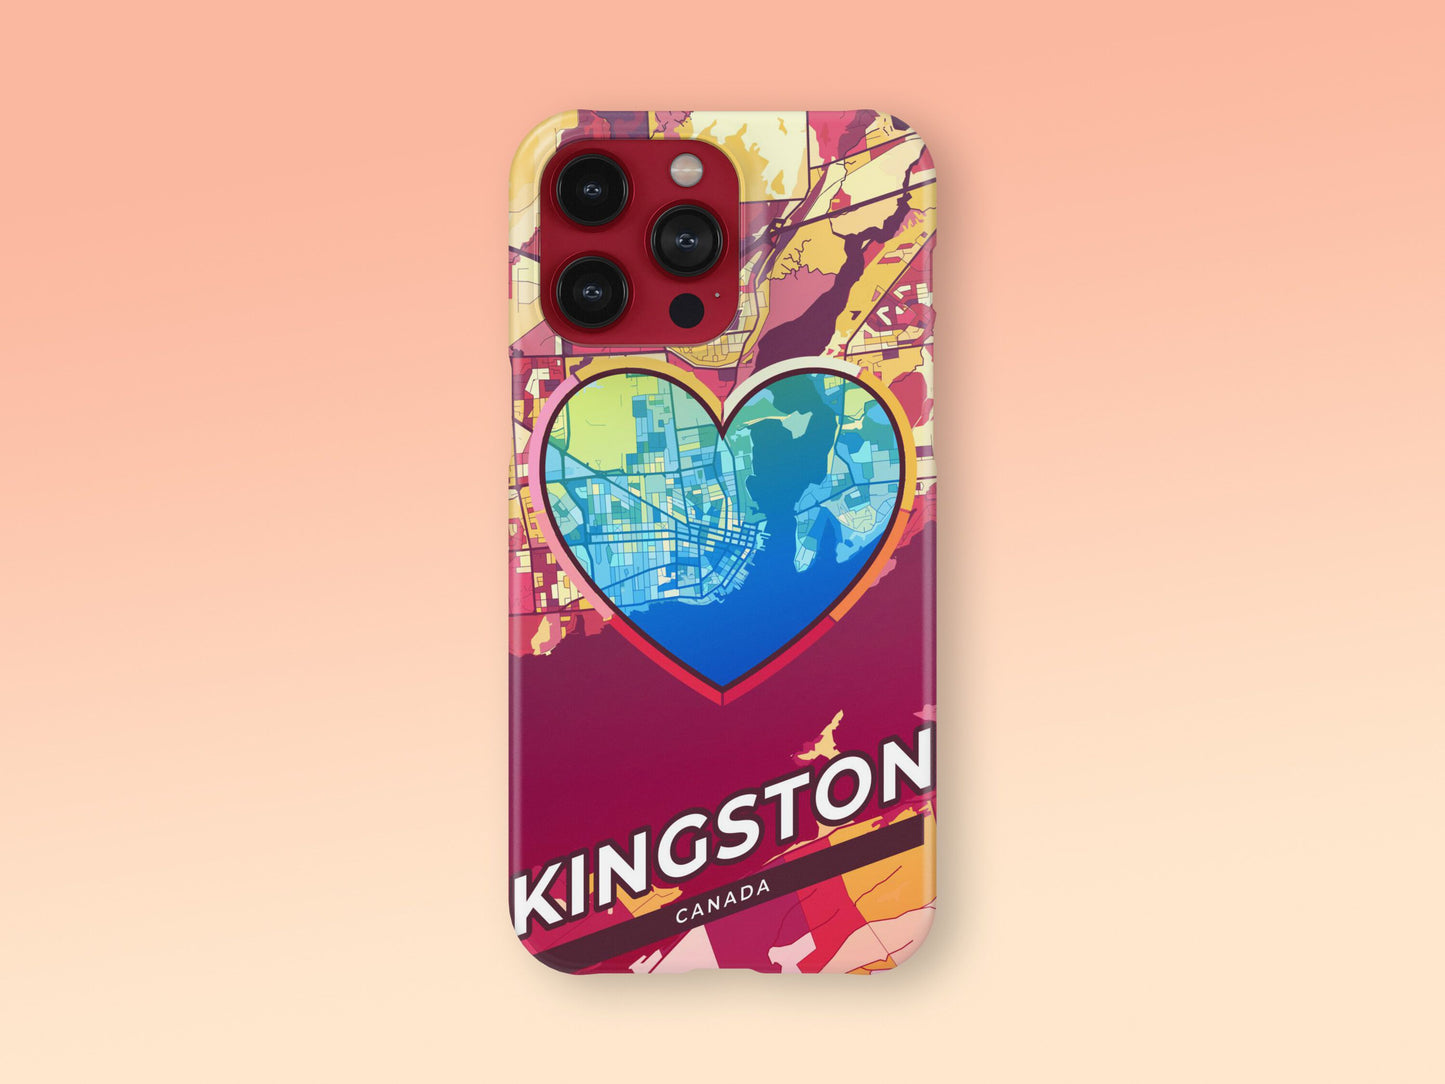 Kingston Canada slim phone case with colorful icon. Birthday, wedding or housewarming gift. Couple match cases. 2